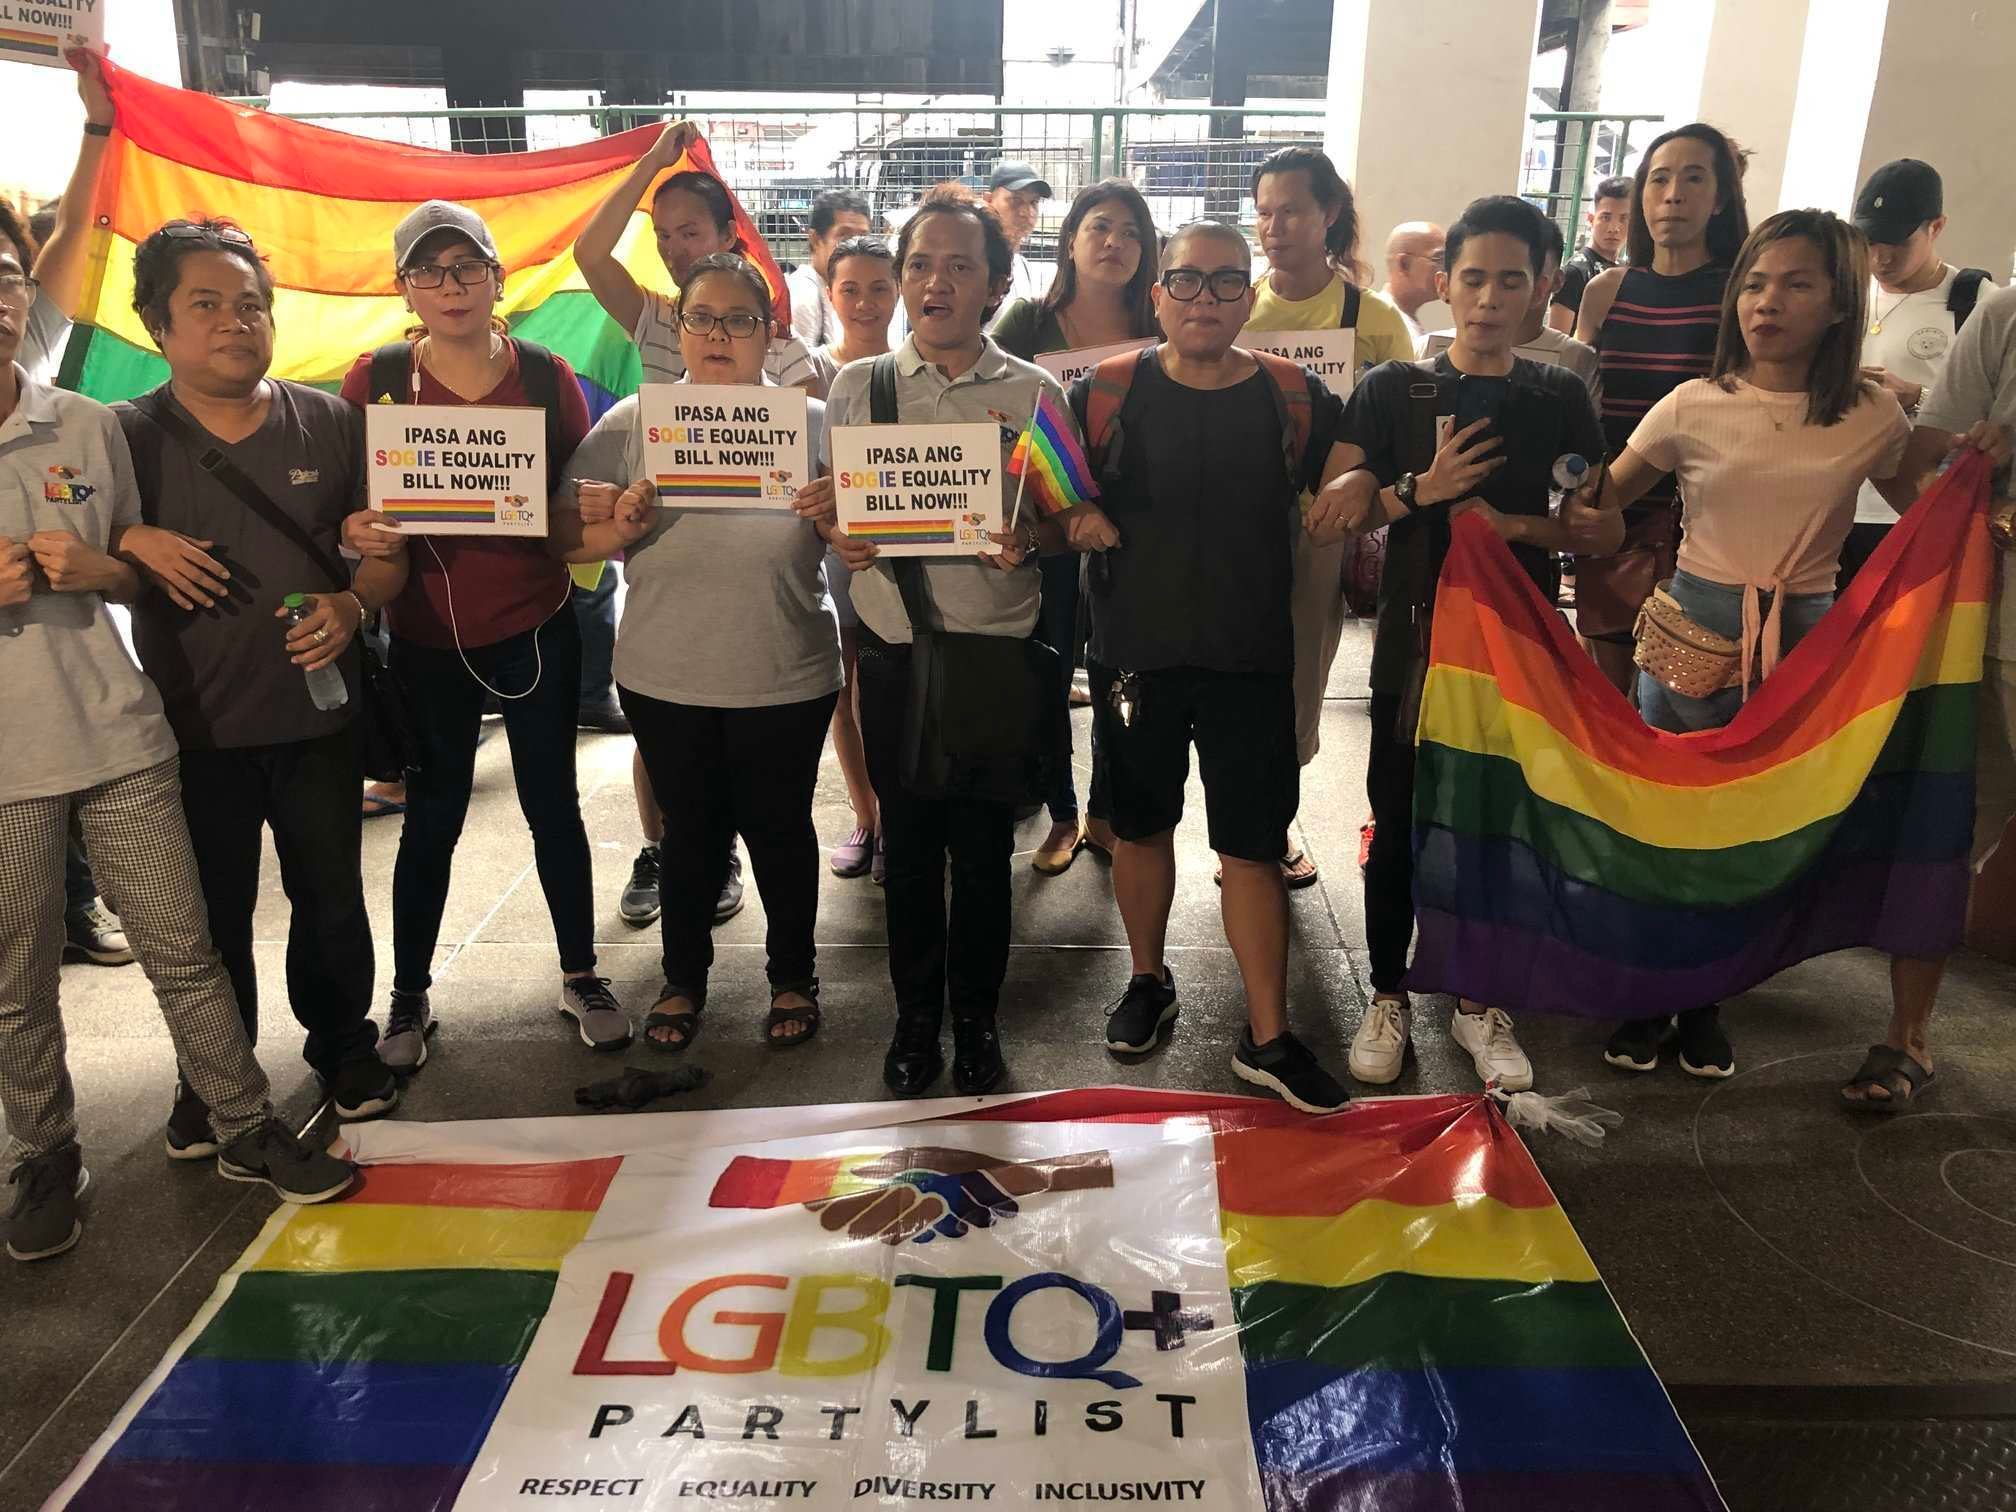 Fire janitress? LGBTQ+ party calls for SOGIE awareness instead